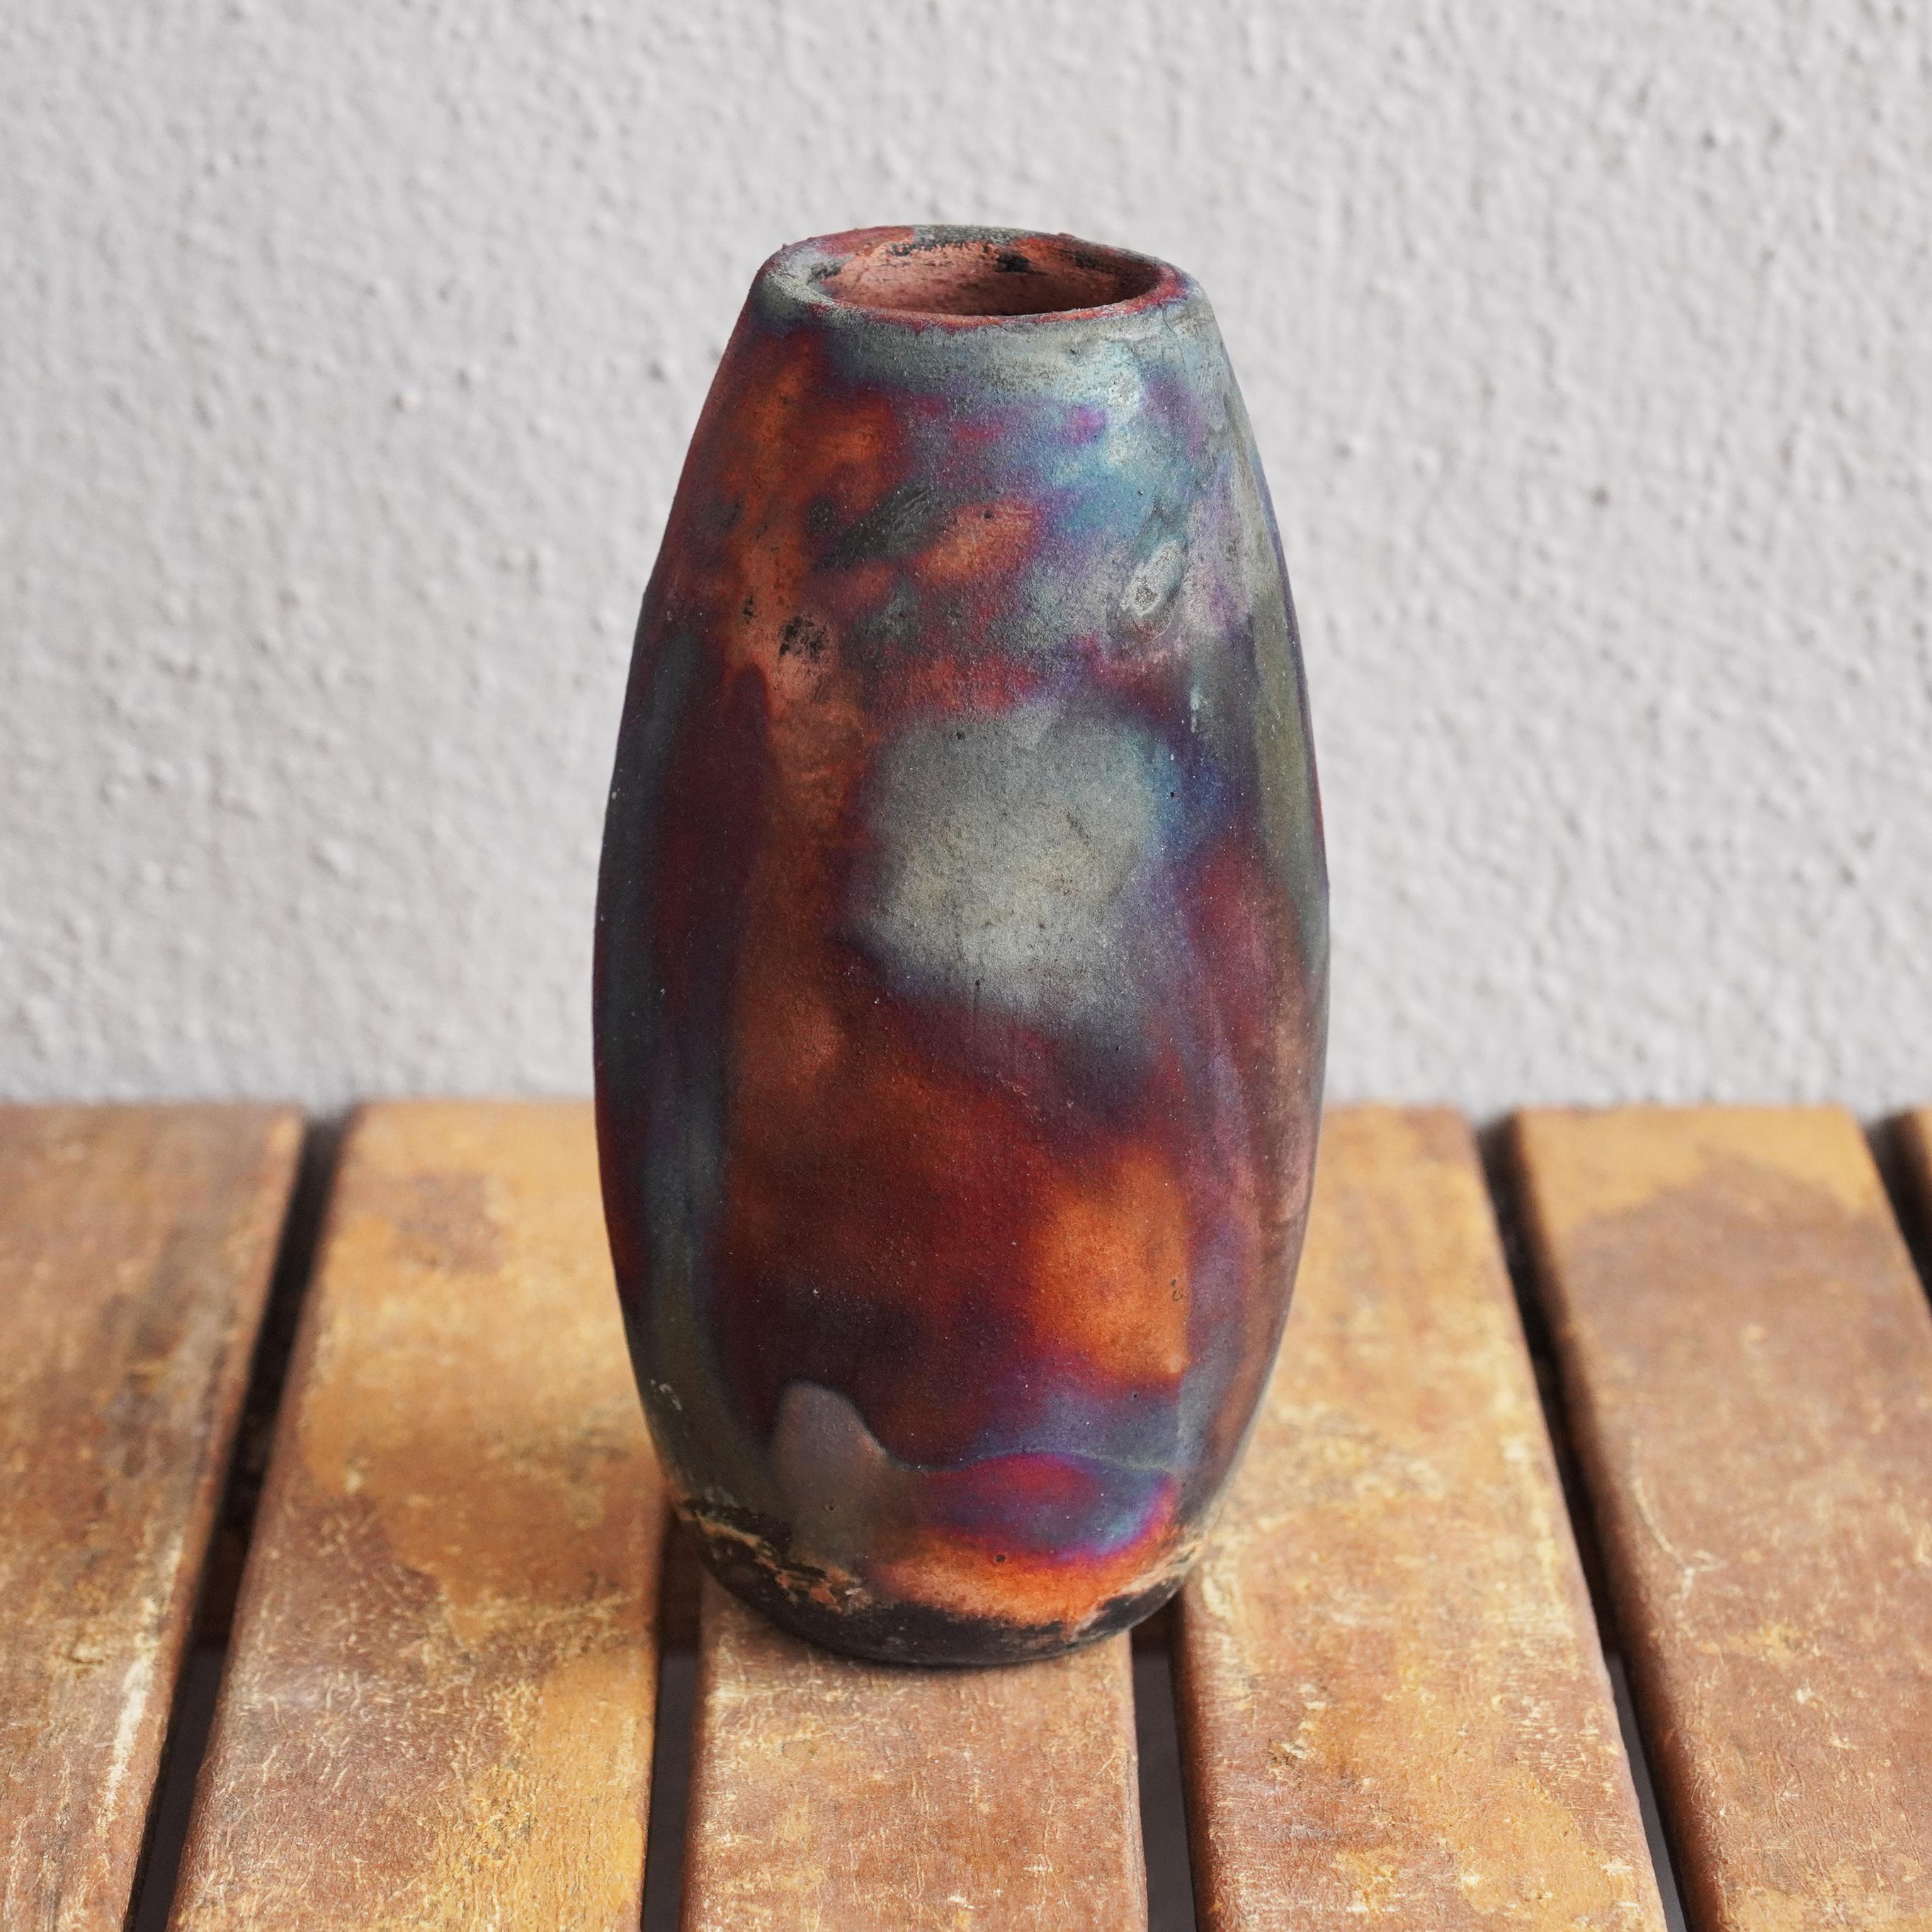 Tsuri ( ツリー ) ~  (n) tree

Our Tsuri vase is based on the classic bottle shape but with a wider mouth at the top. It would definitely look great when put together with other RAAQUU BASICS vases.

You could decorate your space with the Tsuri vase as